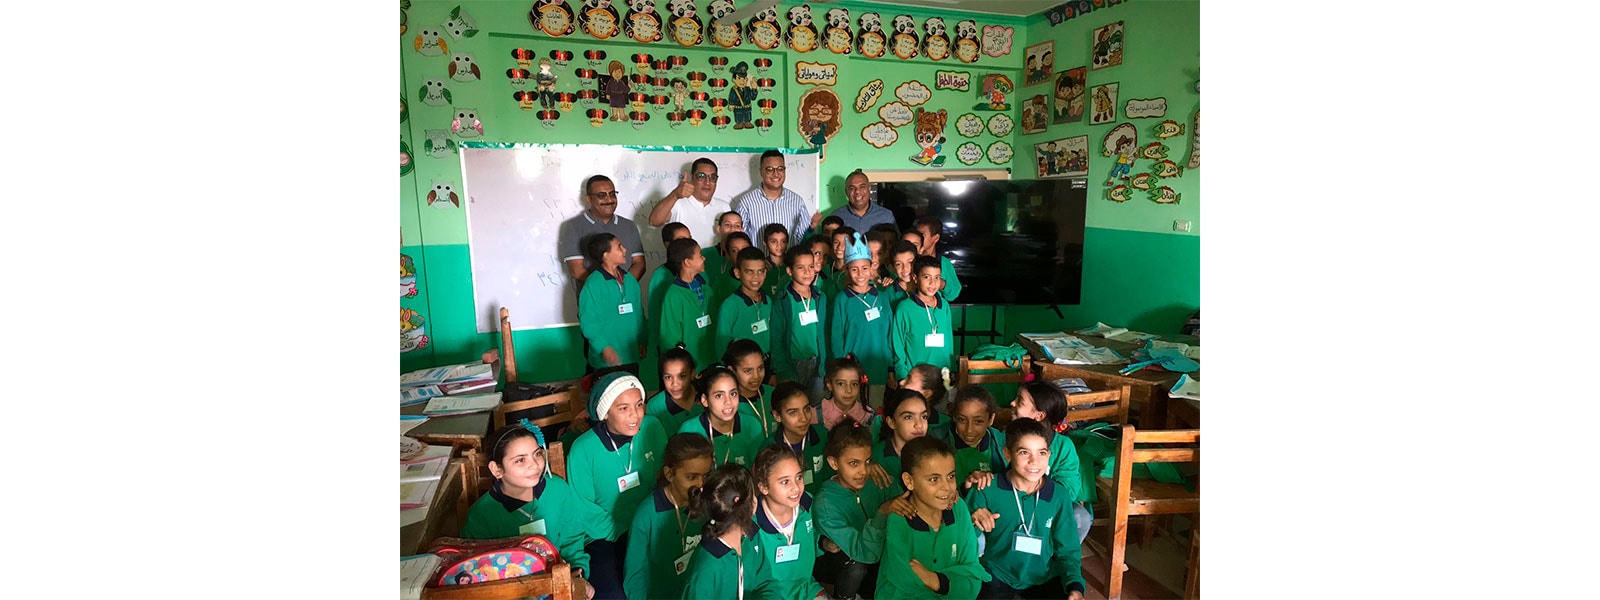 LGxMisr El Kheir complete the second phase of the education file in Assiu